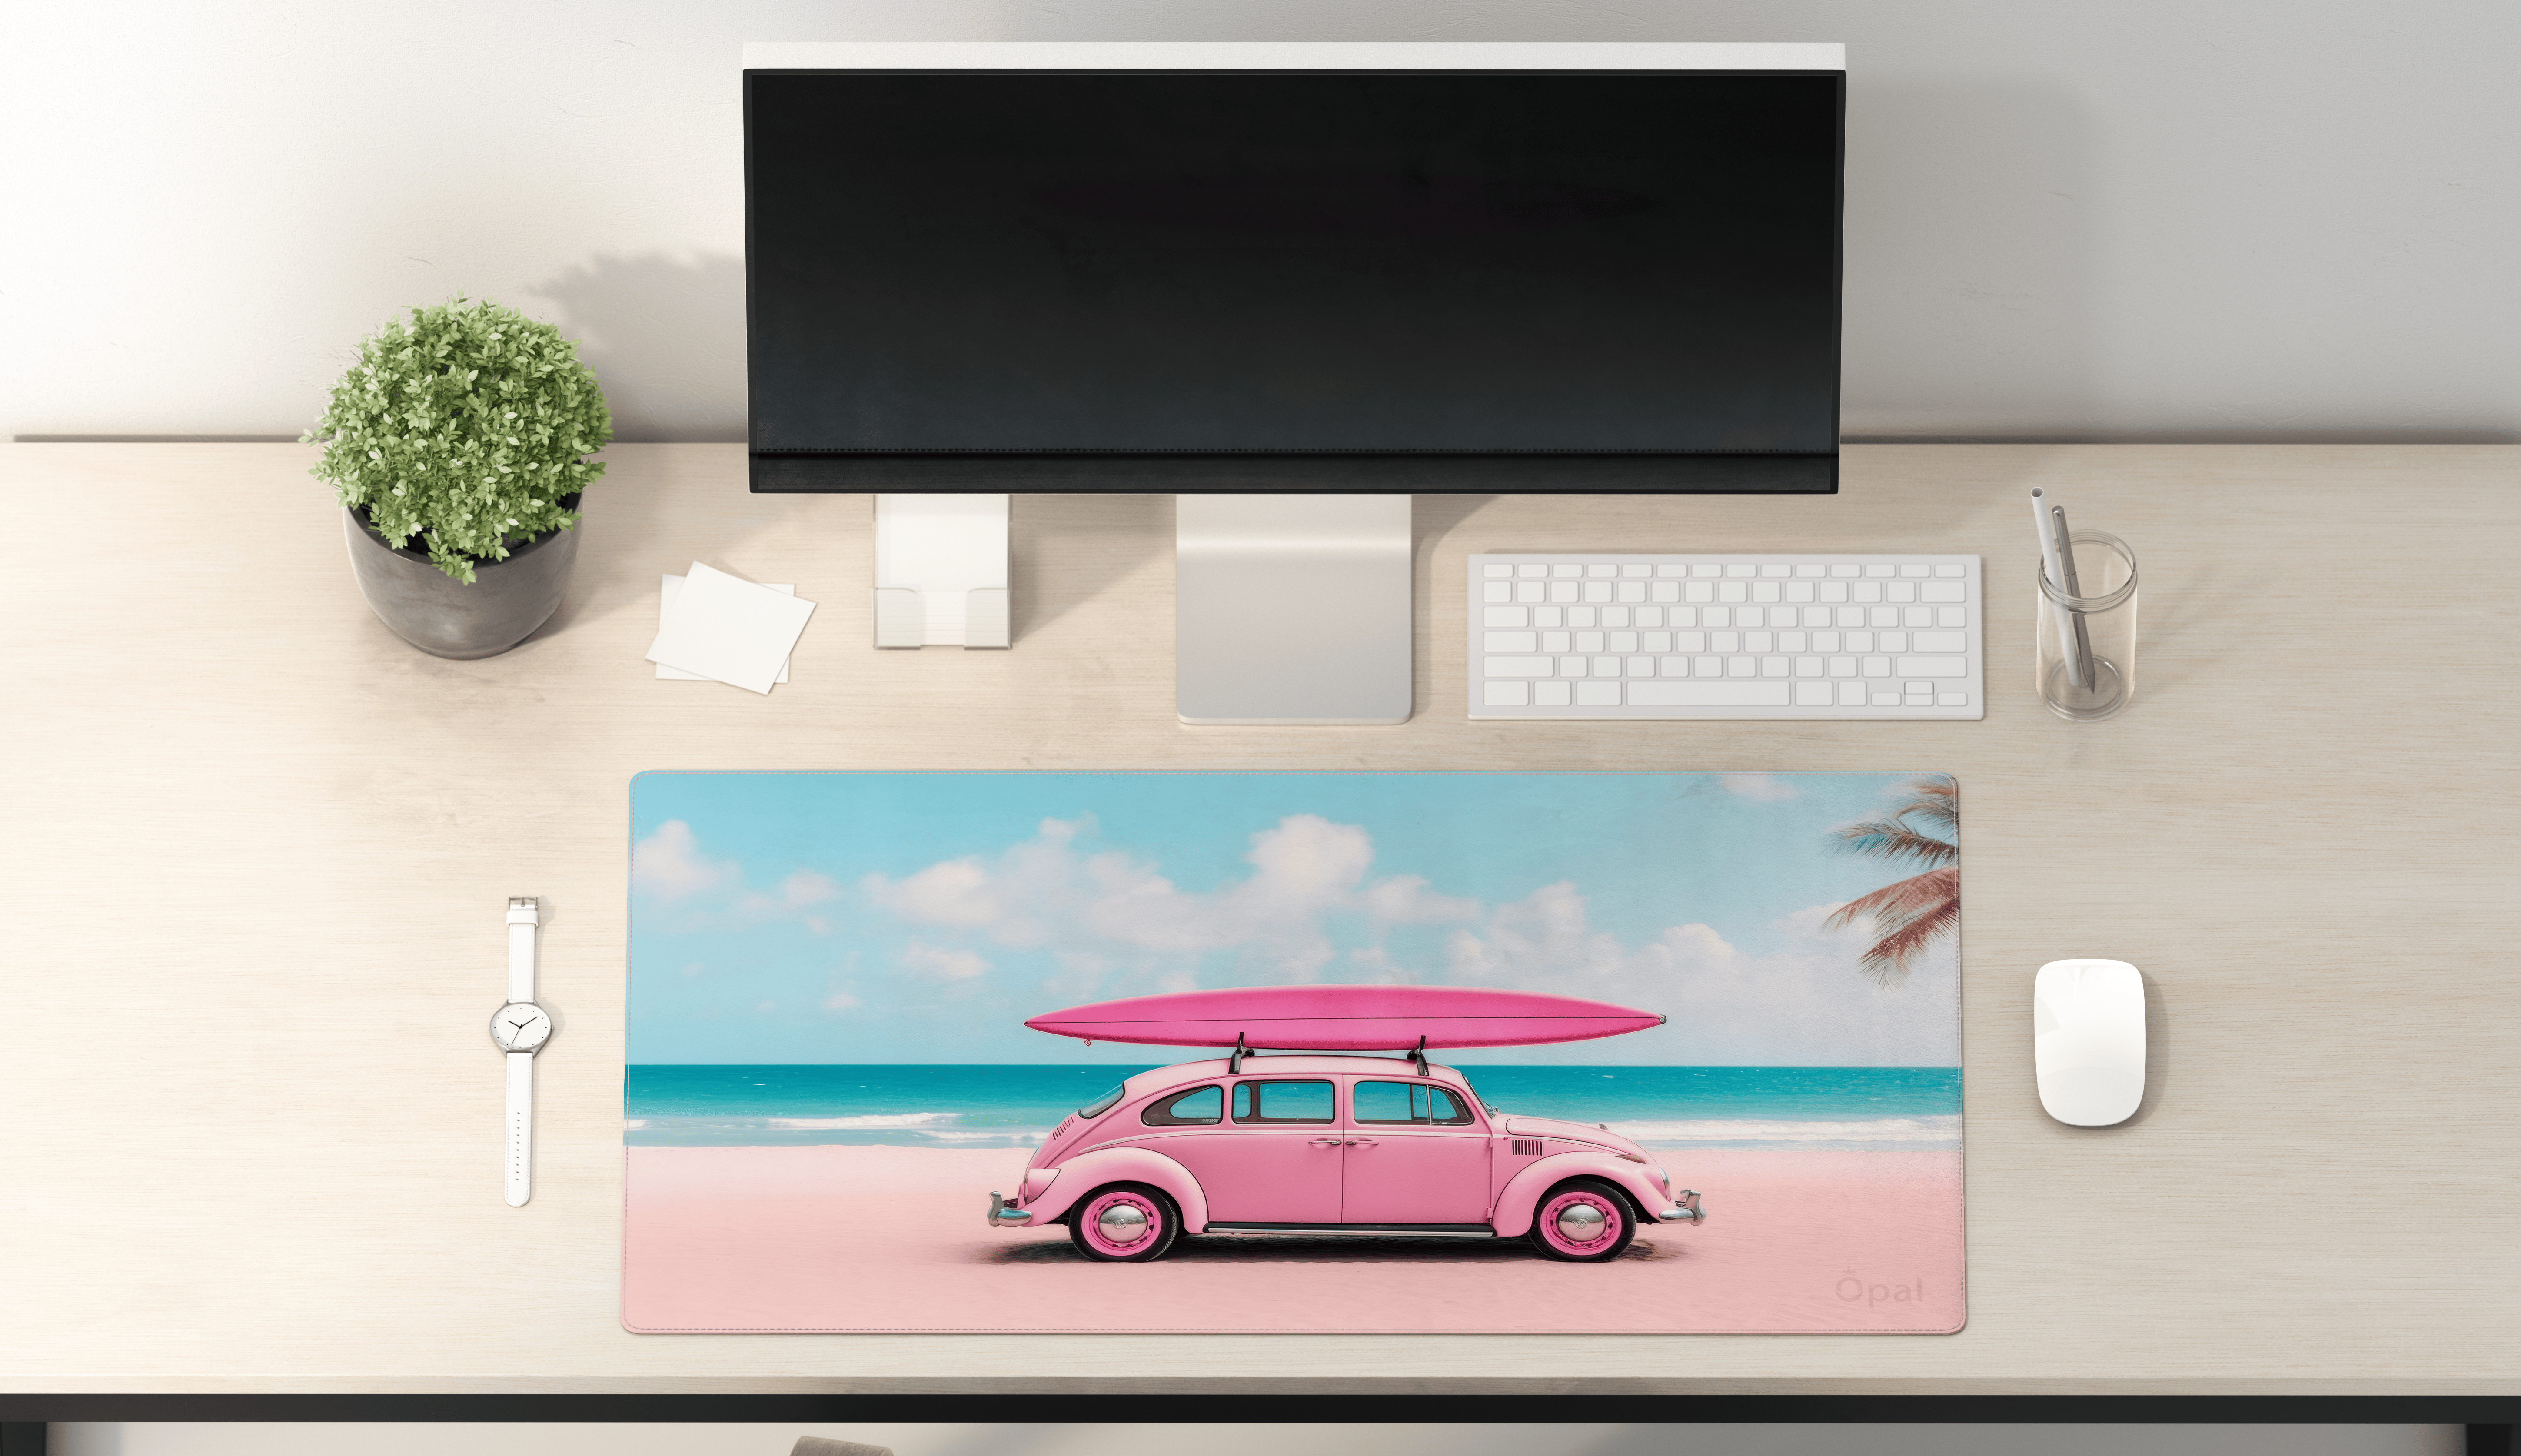 A PINK CAR WITH A SURFBOARD DESK PAD